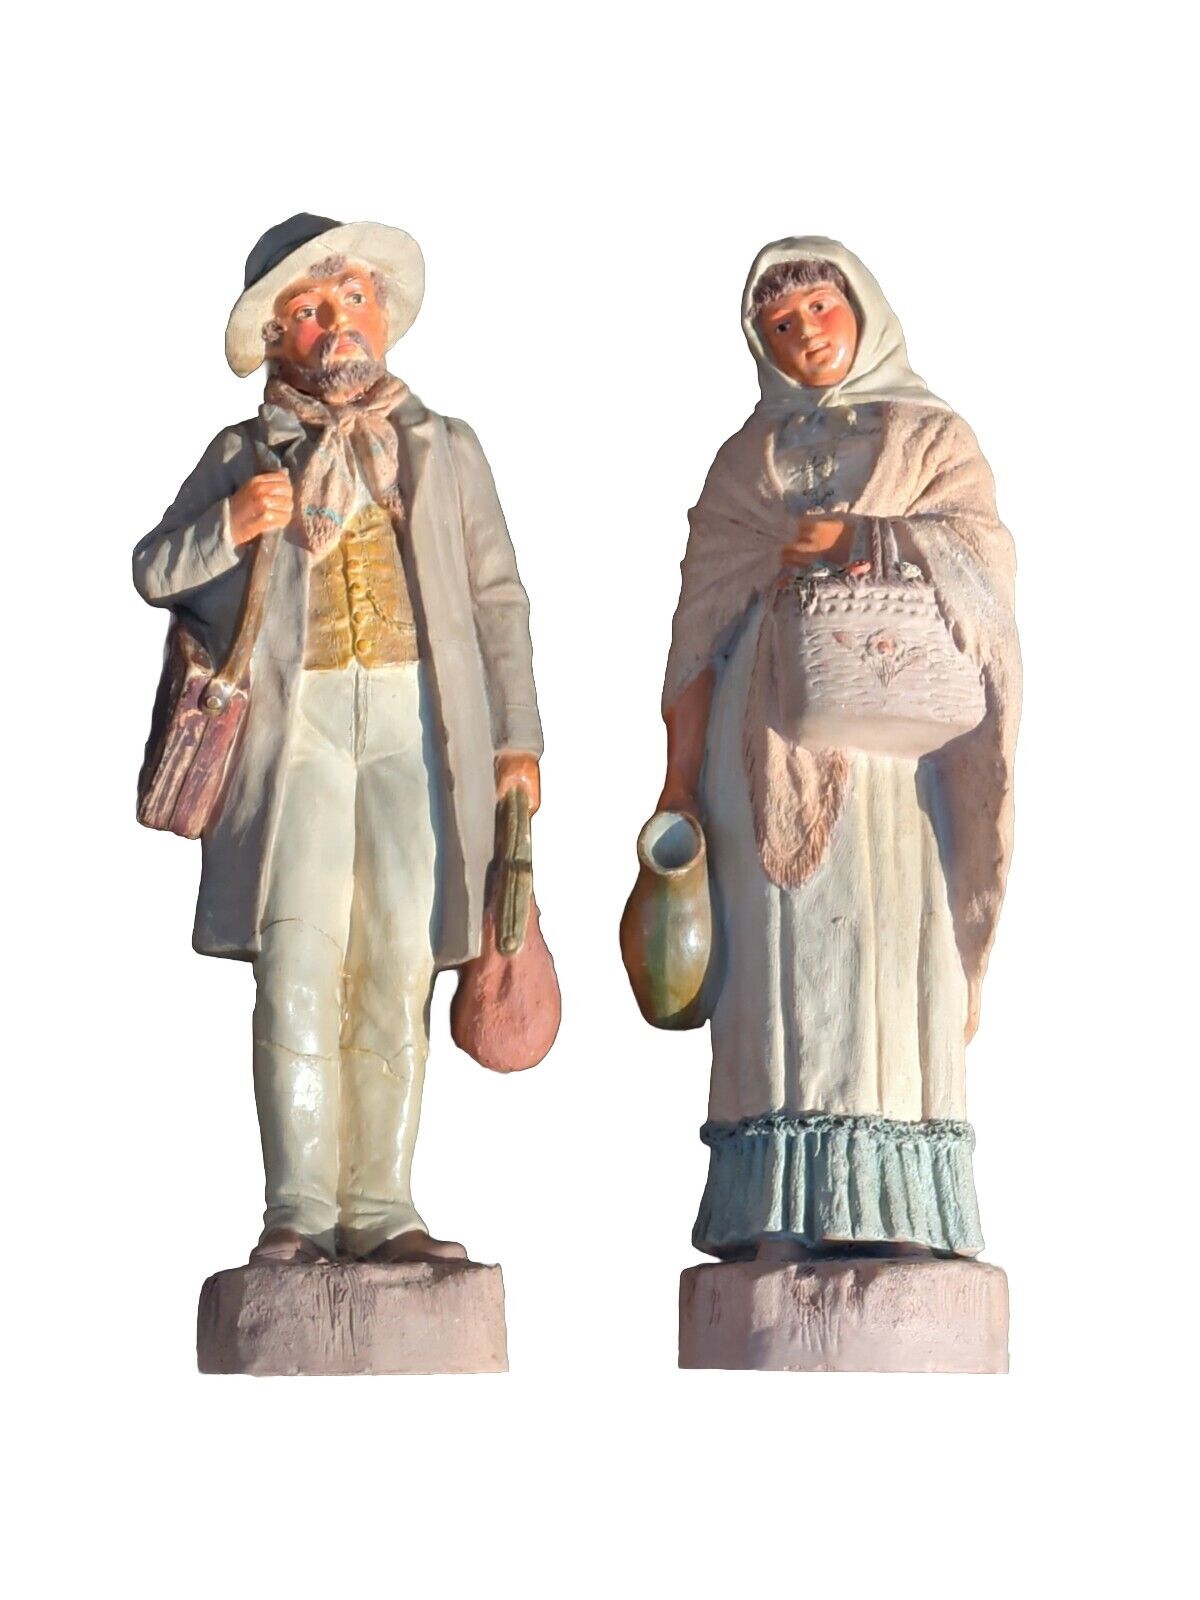 Vintage Caltagirone Terracotta Sculpture Statues Rustic Italian Pottery Man Wife